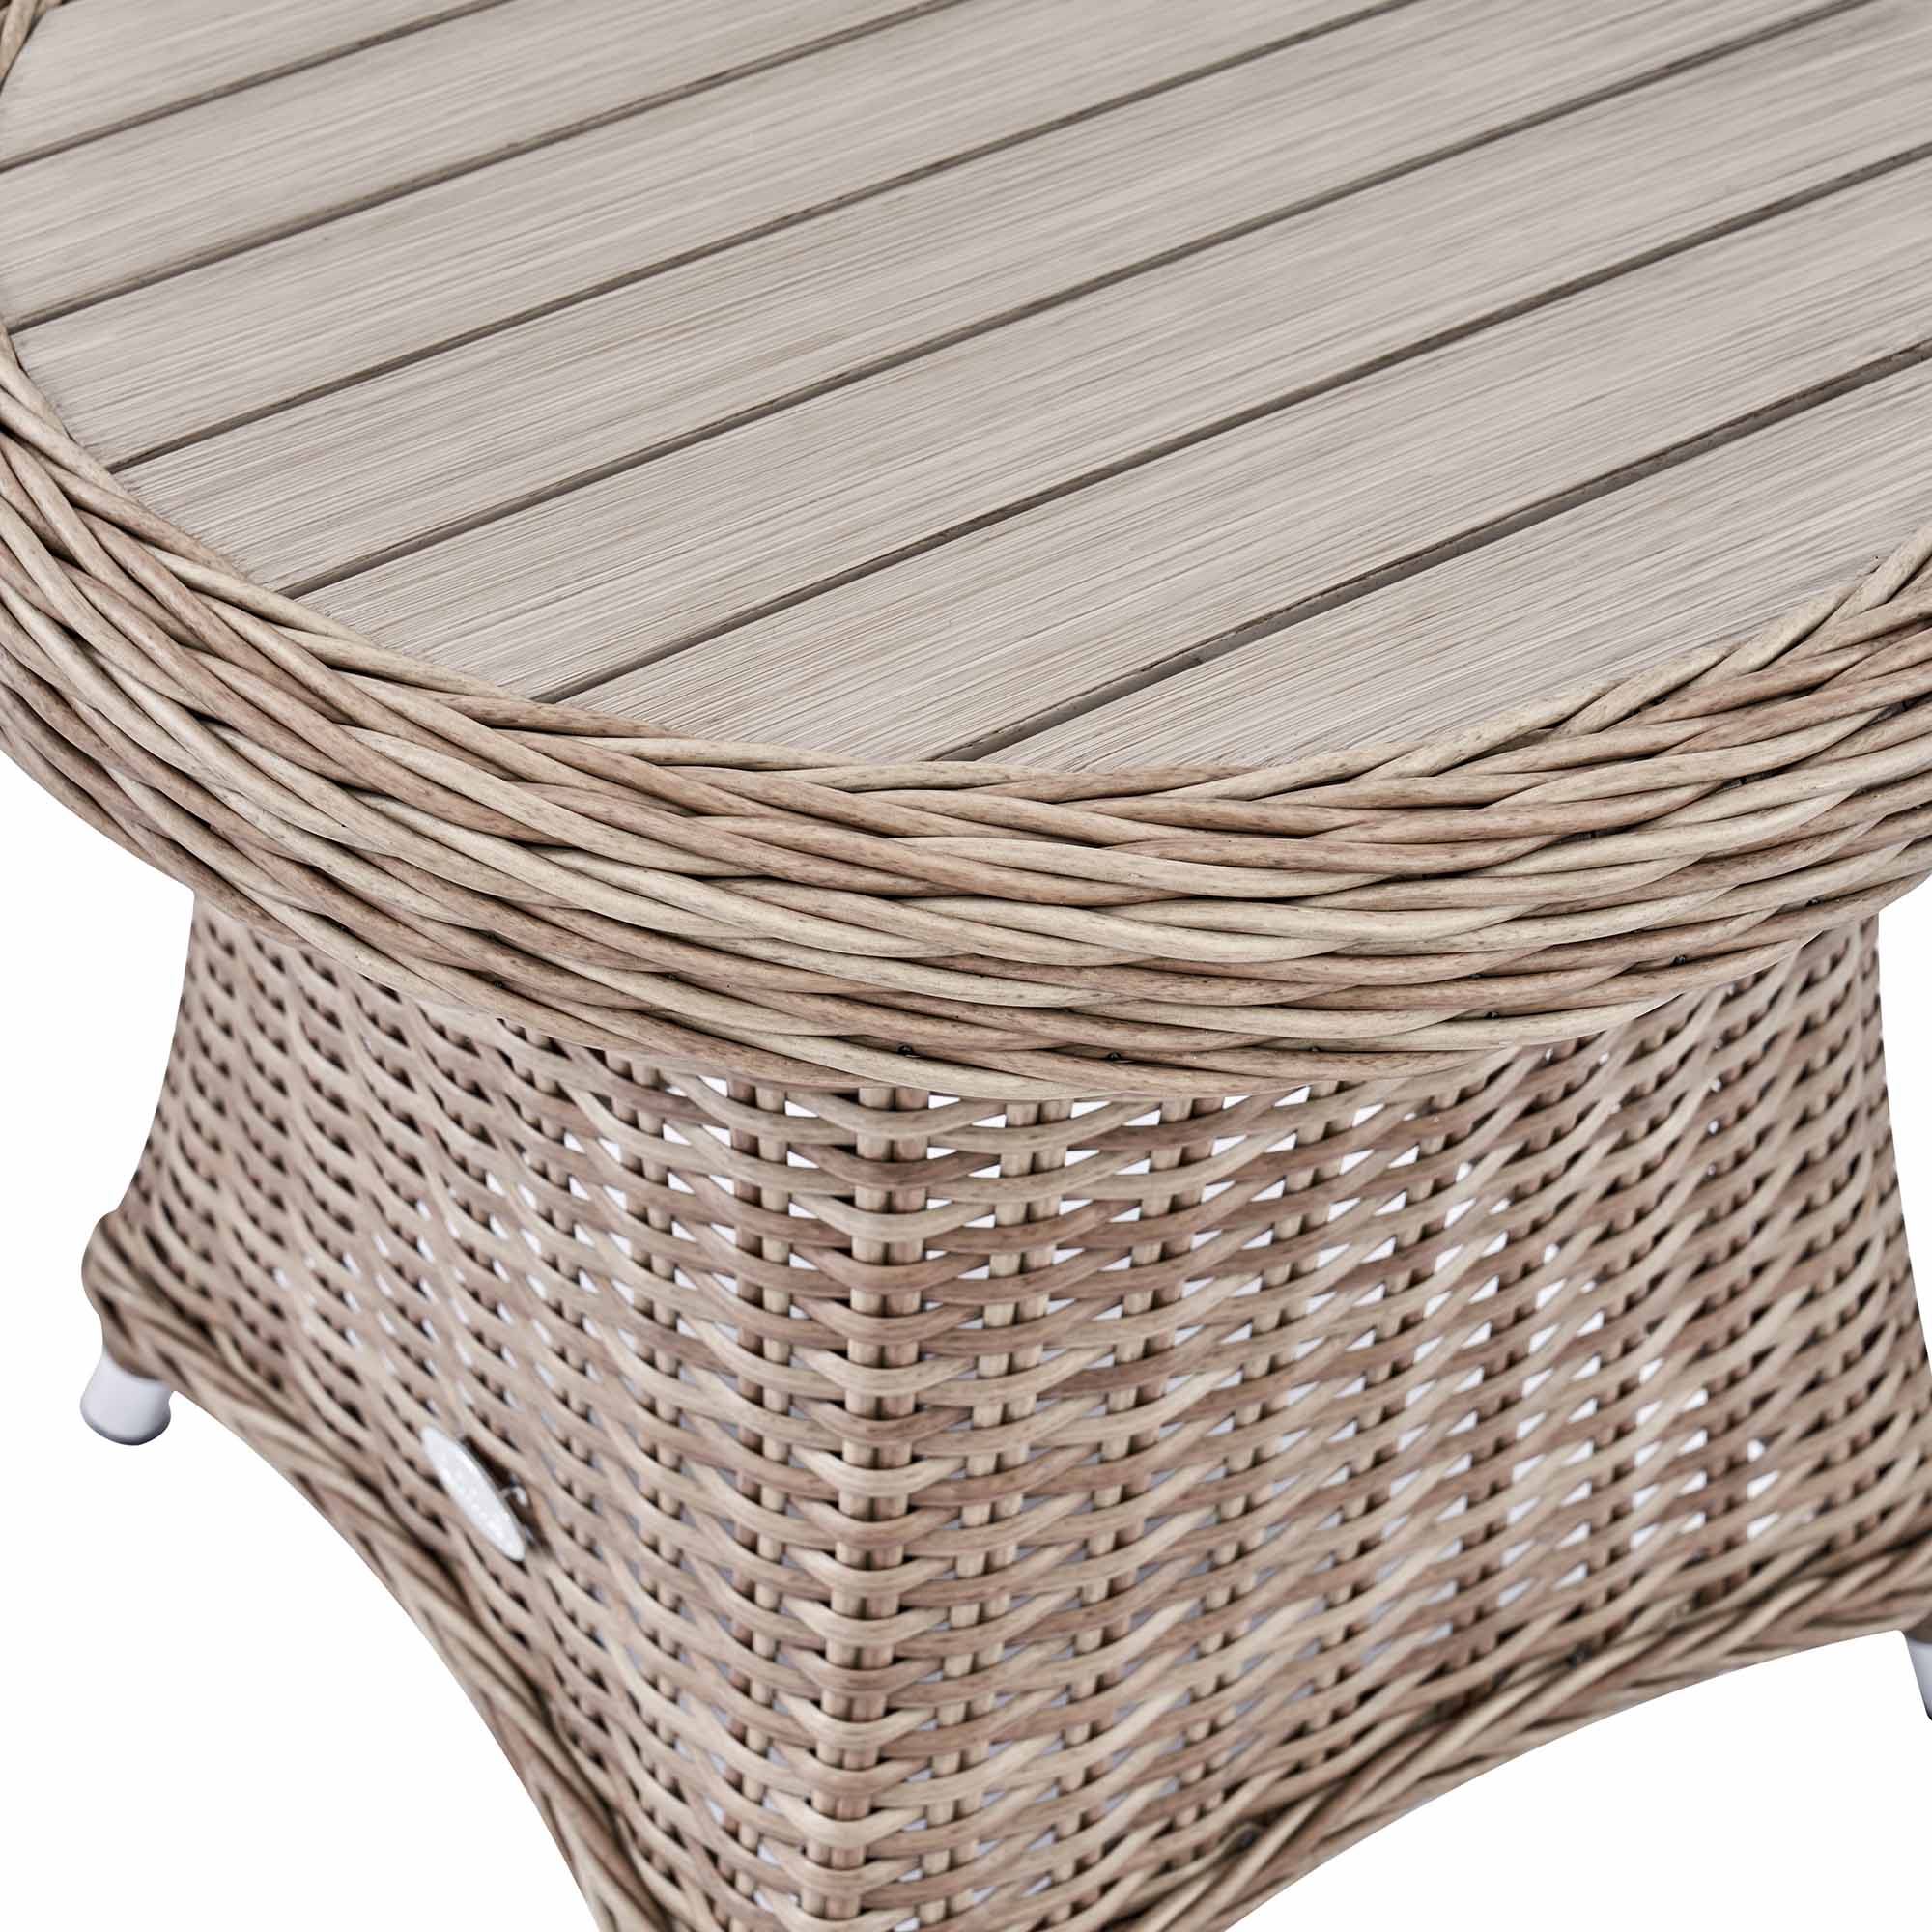 Hampshire 2-Seater Round Wicker Reclining Bistro Set with Stools, Natural